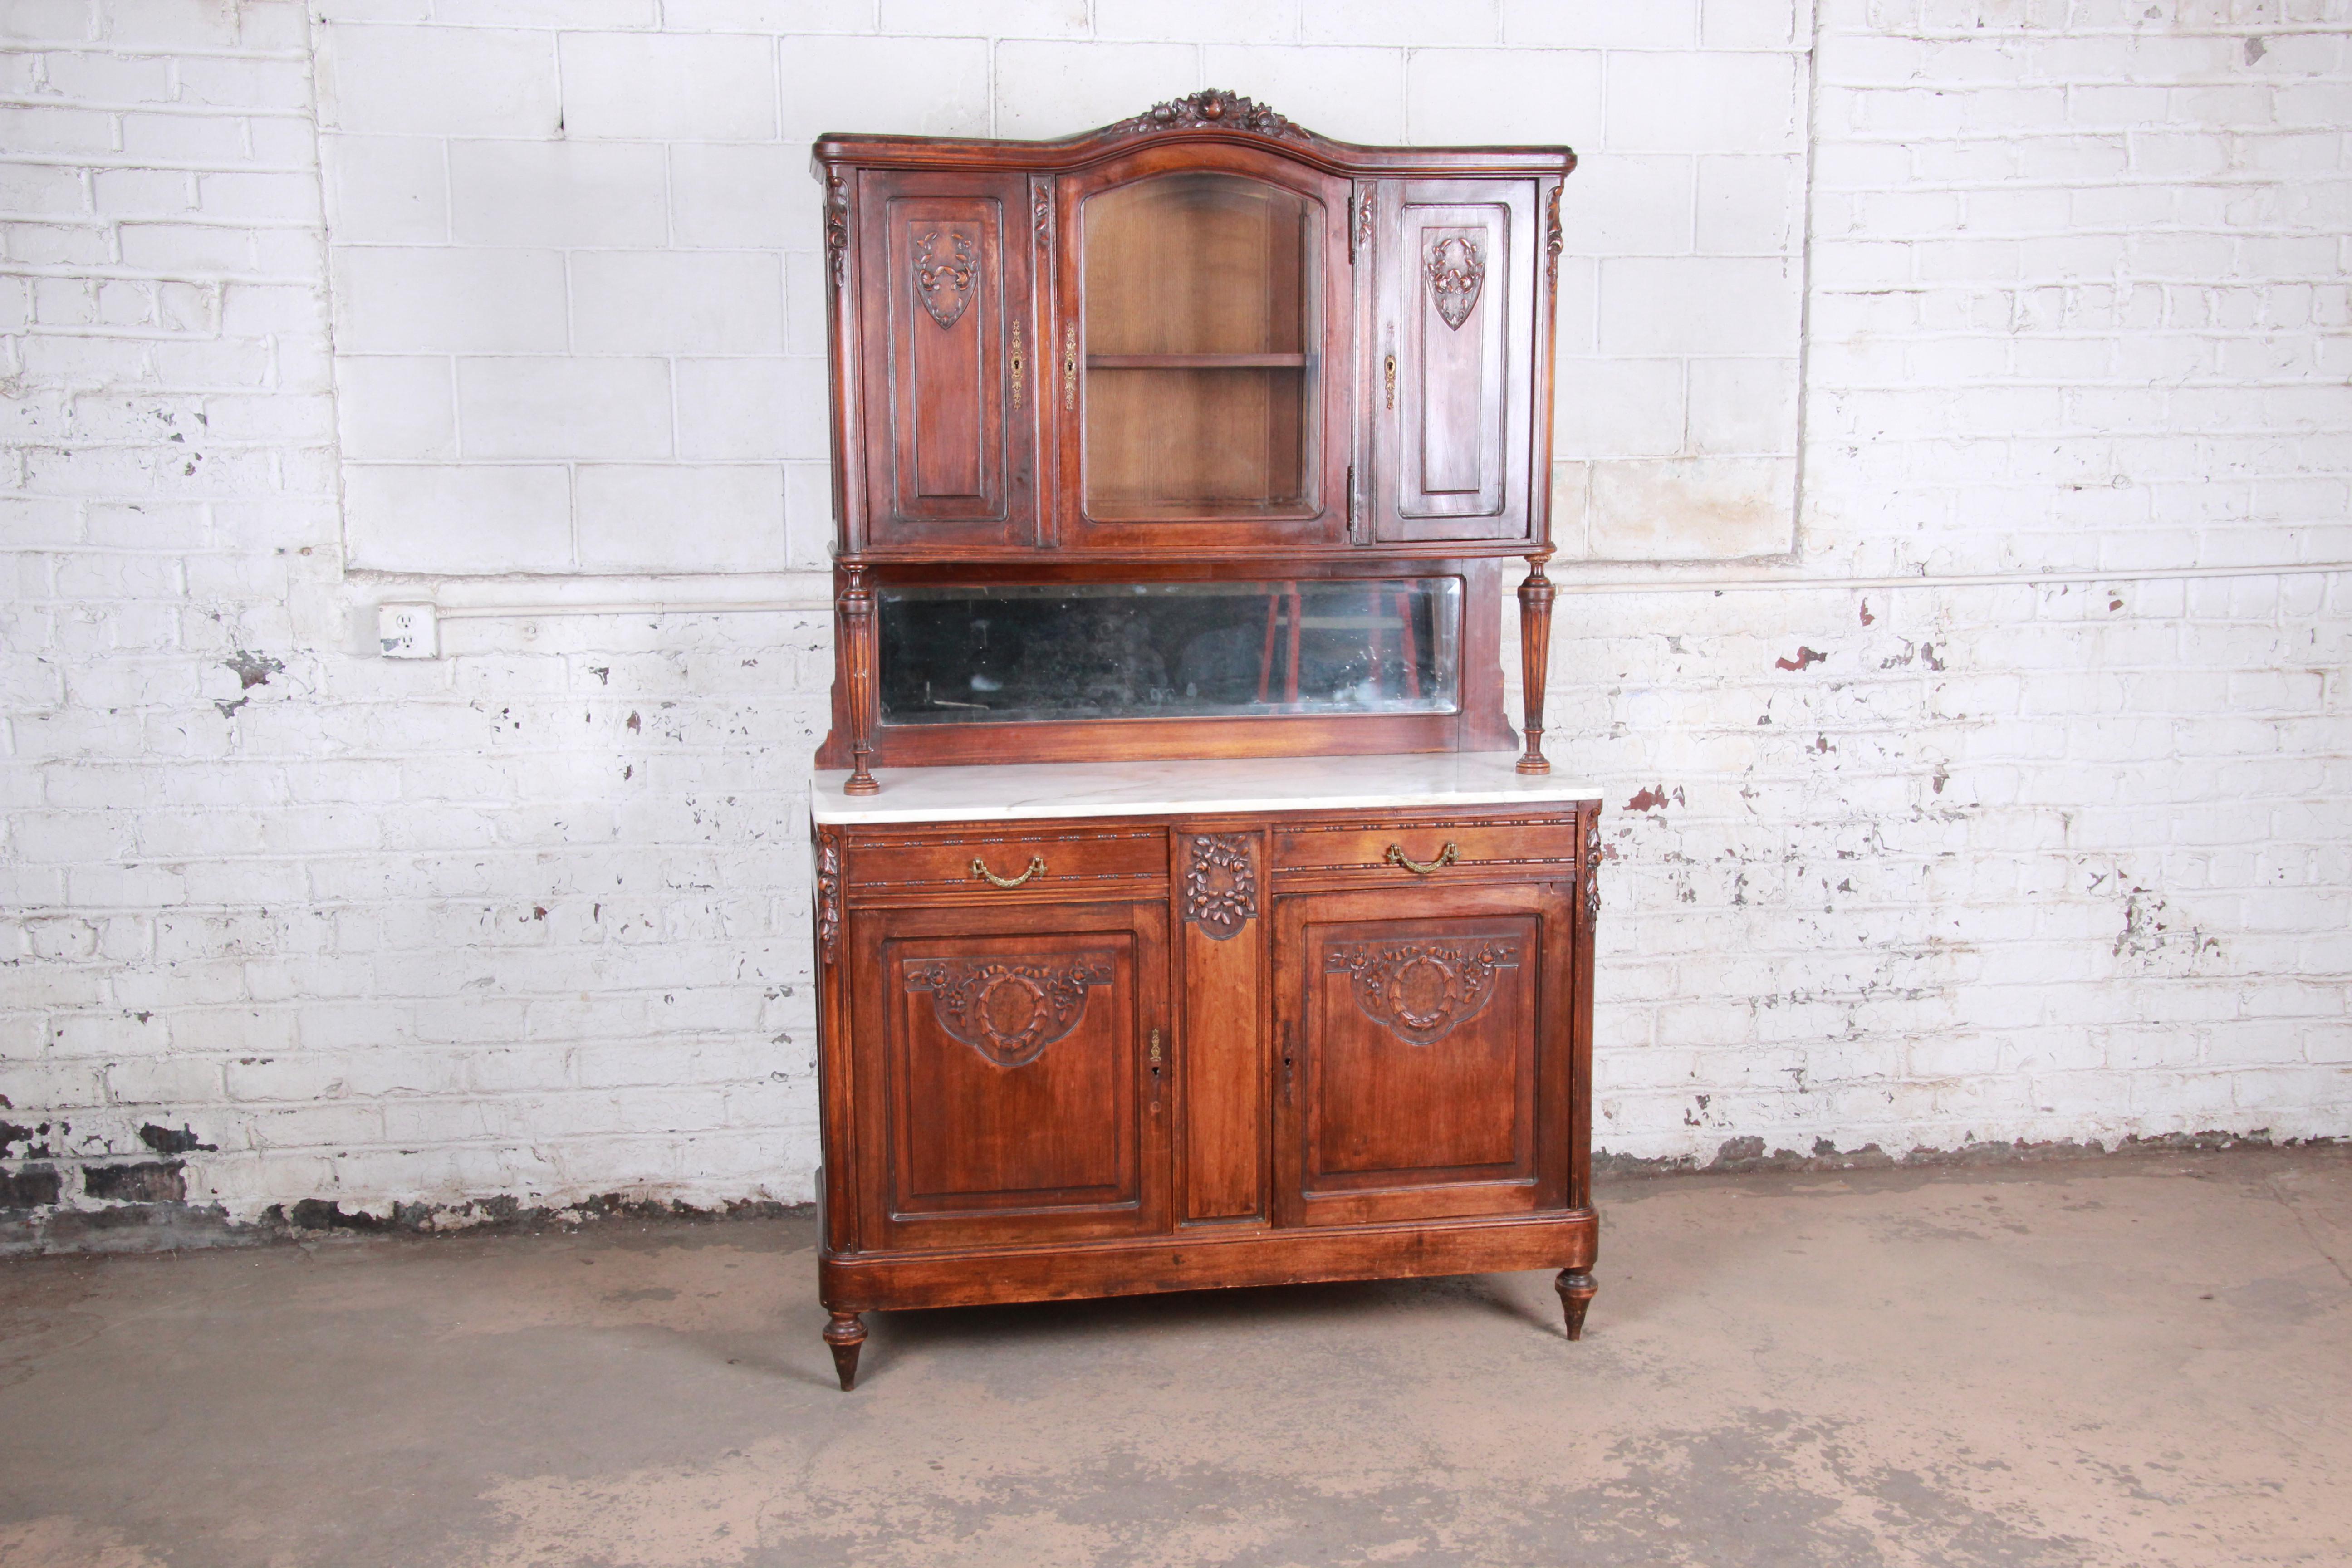 A gorgeous 19th century French carved walnut marble top sideboard or bar cabinet. The cabinet features solid walnut construction with stunning carved wood details. It has a beautiful white marble top with mirrored backsplash. The cabinet offers